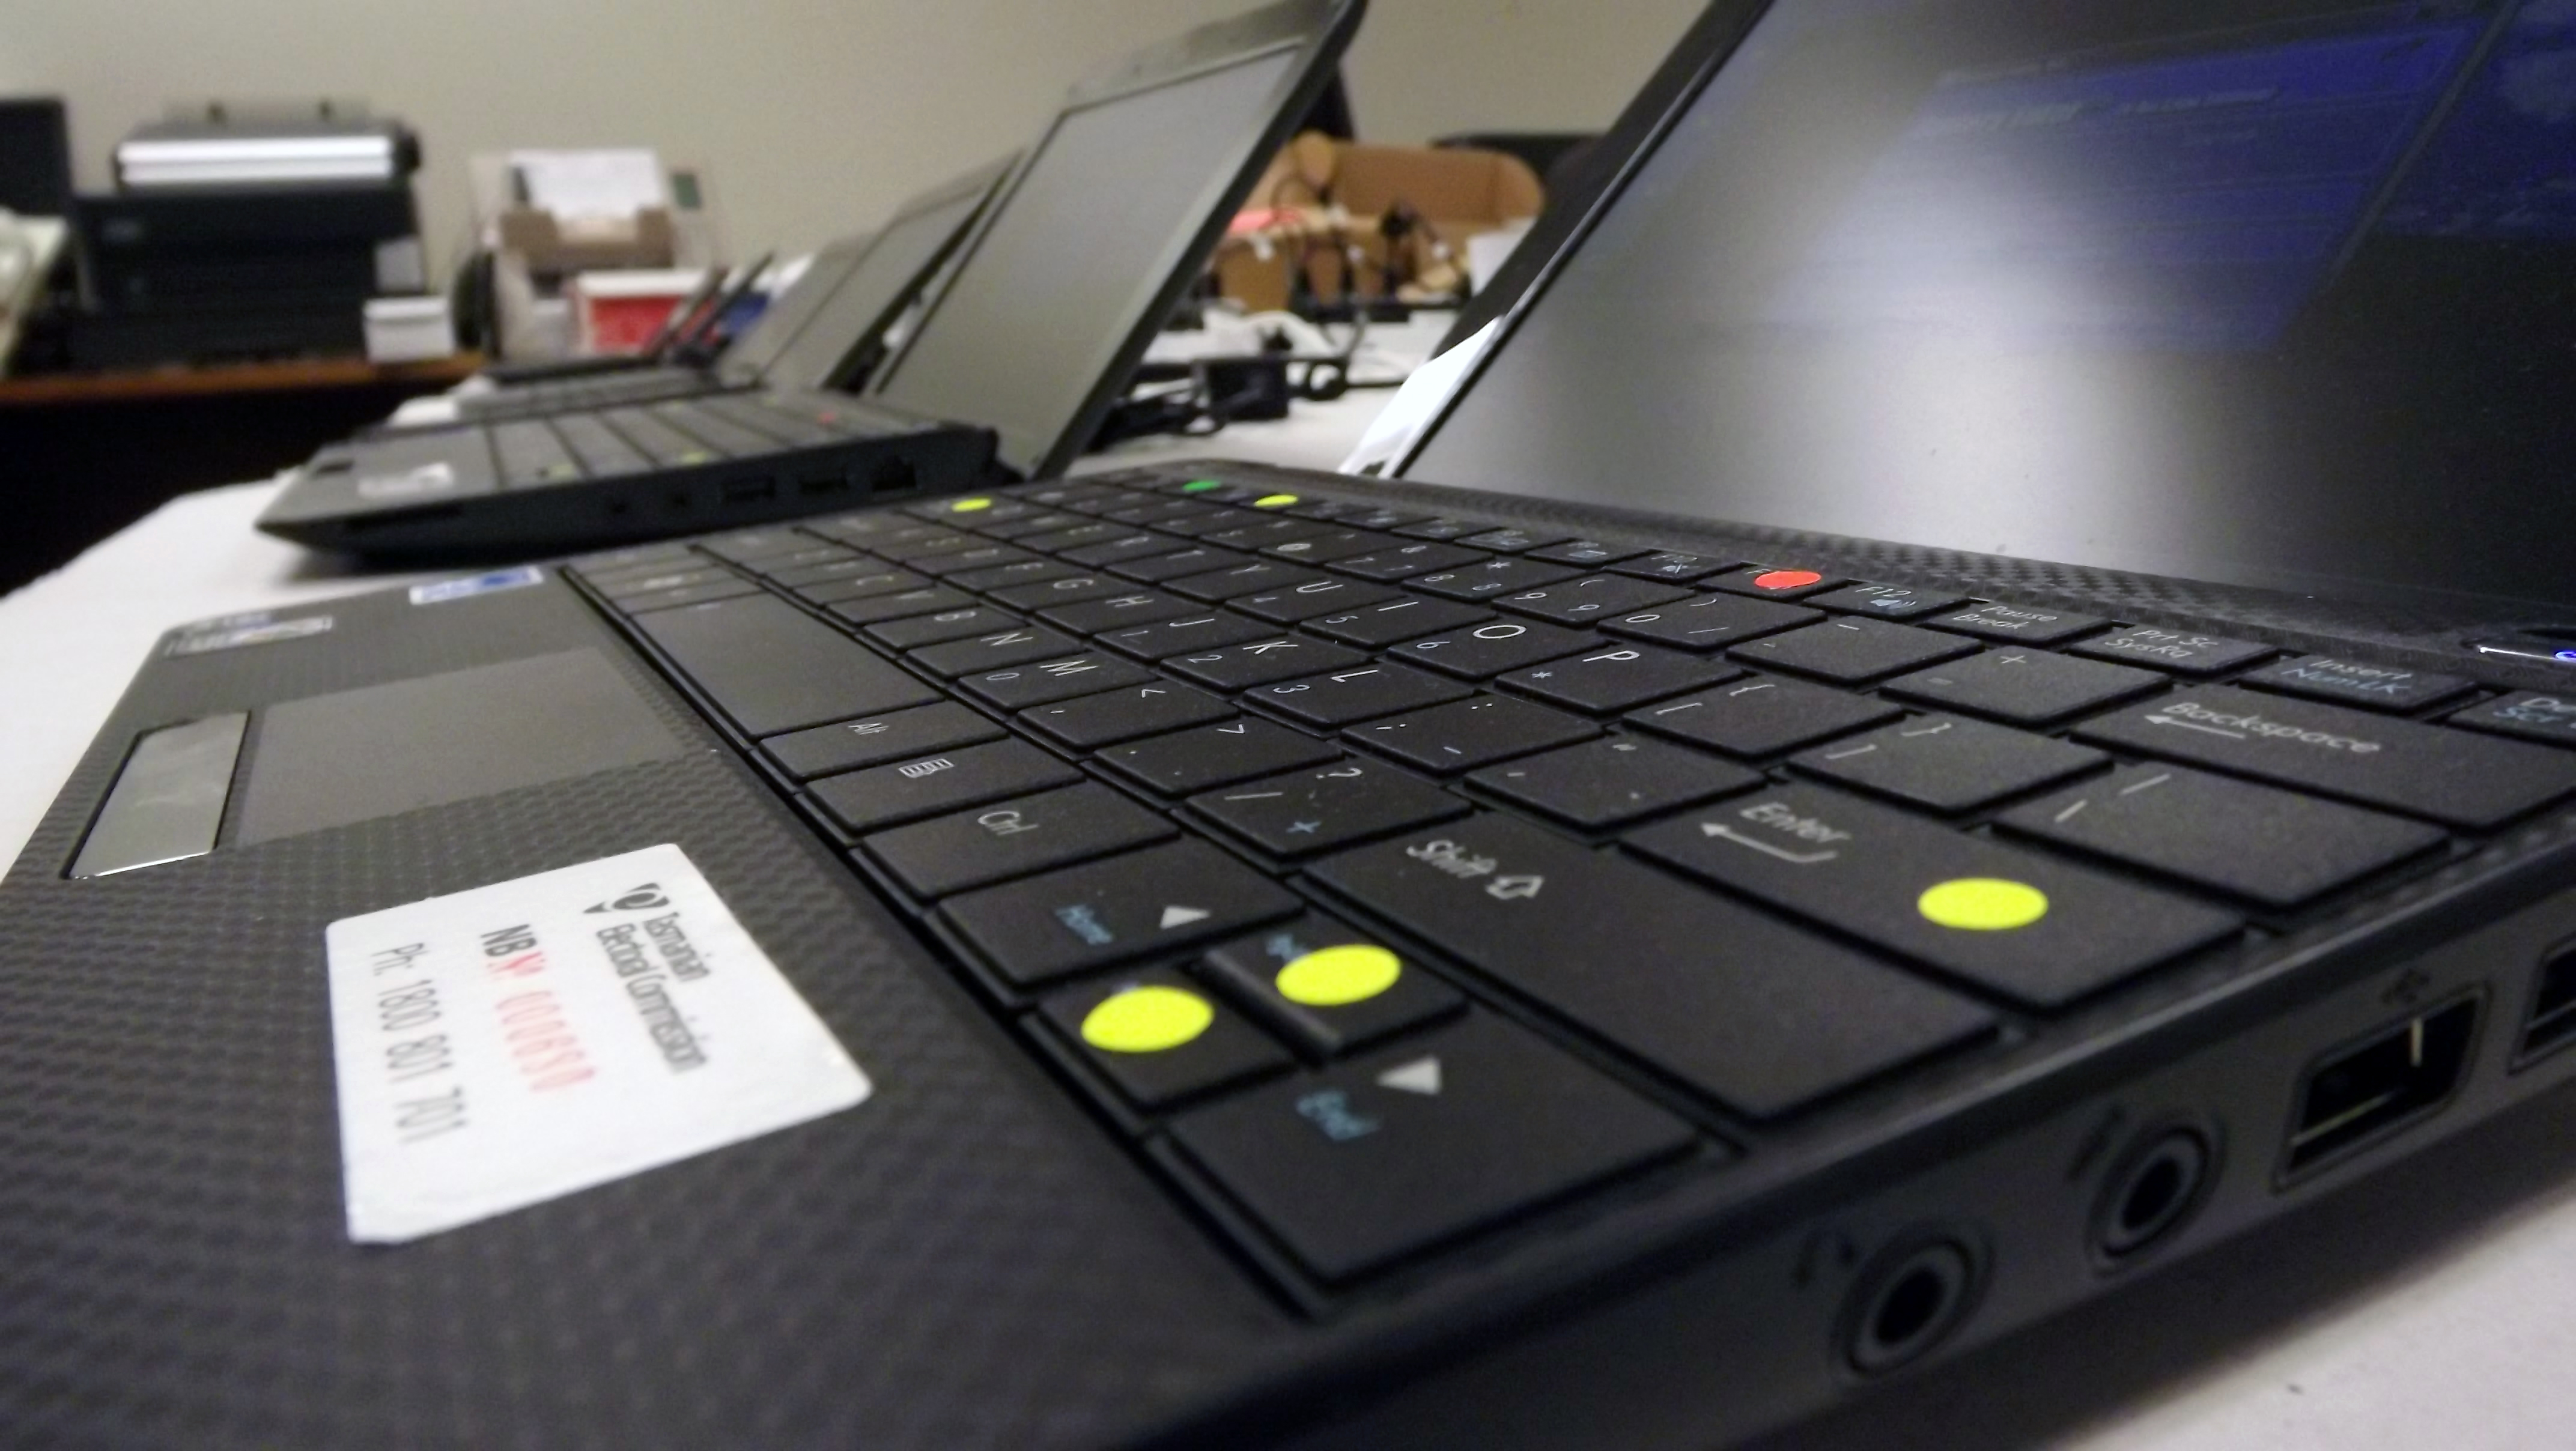 Netbooks had coloured dots placed on frequently used keys to speed up the marking of voters' names off the roll